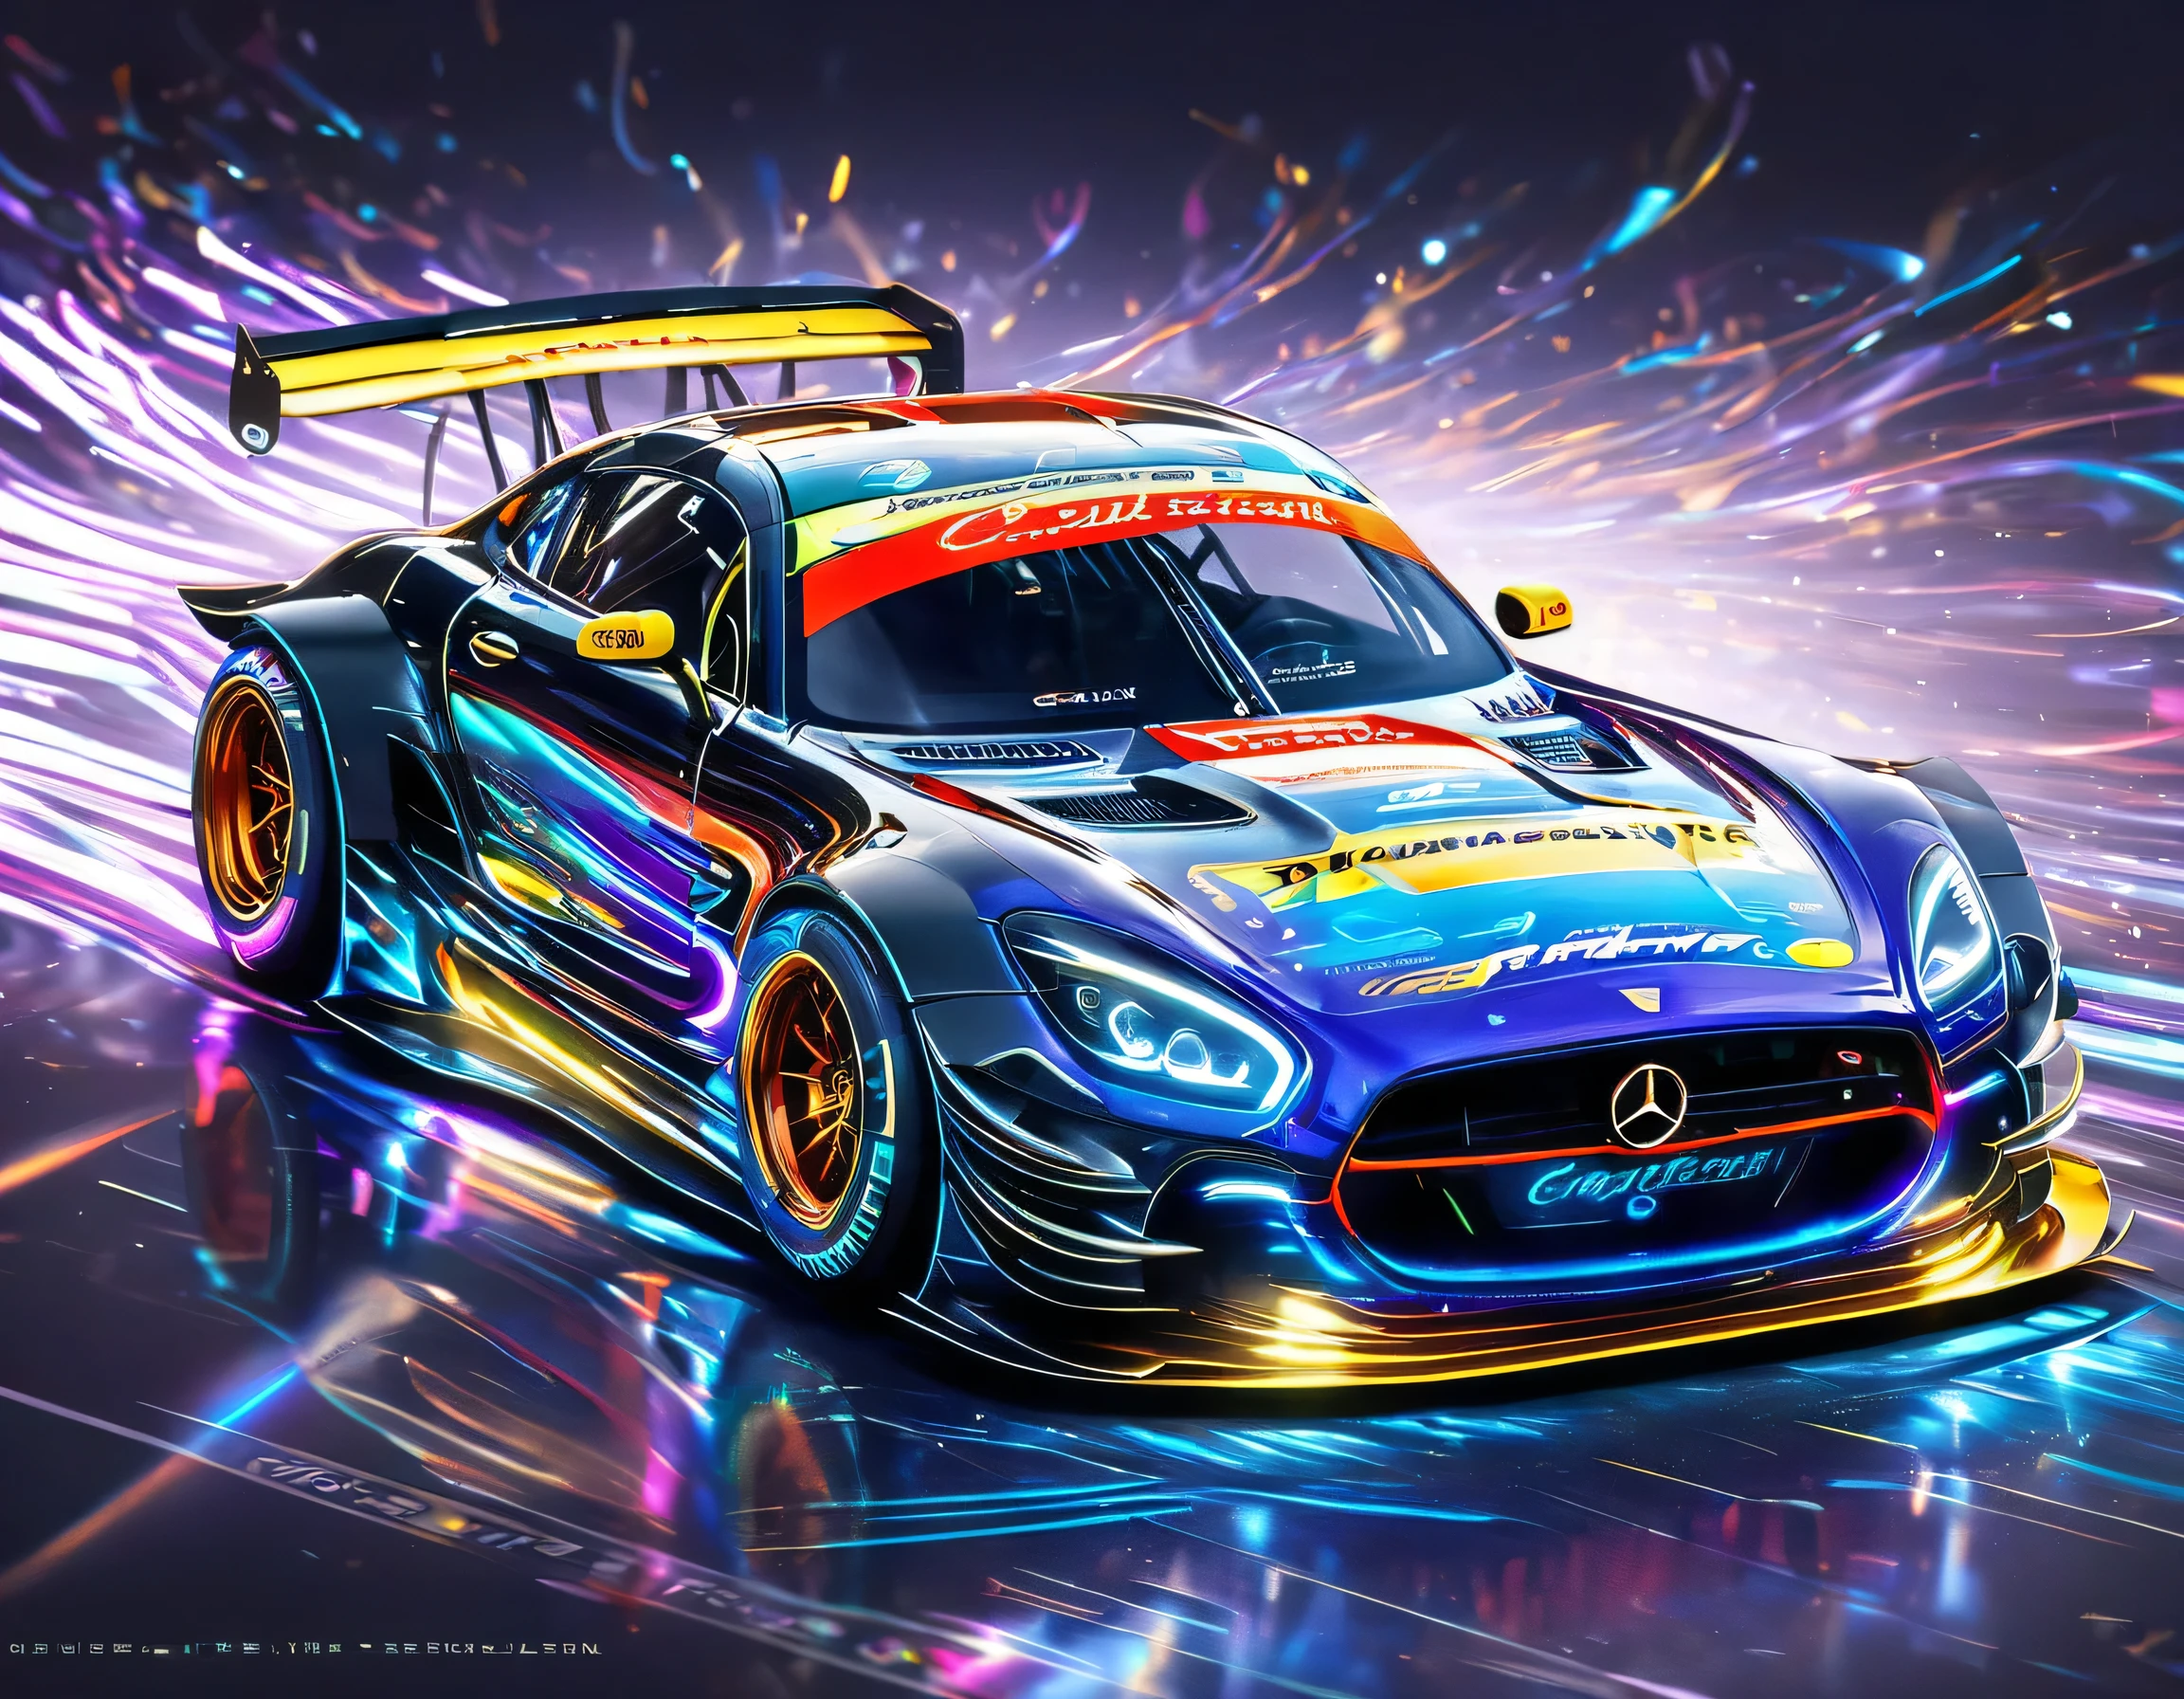 Capture the thrilling moments of a sophisticated racing car racing through a vibrant circuit field. Each line and curve of the car&#39;s aerodynamic body is、フォトリアルなディテールで細心の注意を払ってrenderingされています。. The circuit field casts lively and long with rich contrasting colors., dynamic shadows on the track. If you pay attention to the shiny metallic car body,, Metallic light reflects coldly, Creates an exhilarating sense of speed. The realistic masterpiece of the wind blowing through the circuit field is a top-notch masterpiece that is a must-see for race fans.,rich colors,rendering,colorfulな呪文を唱える,beautiful halation effect,racing car,structurally correct,colorful,nice,Highest,masterpiece,Highest品質,hologram,neon lines,powerful,Highestの構図